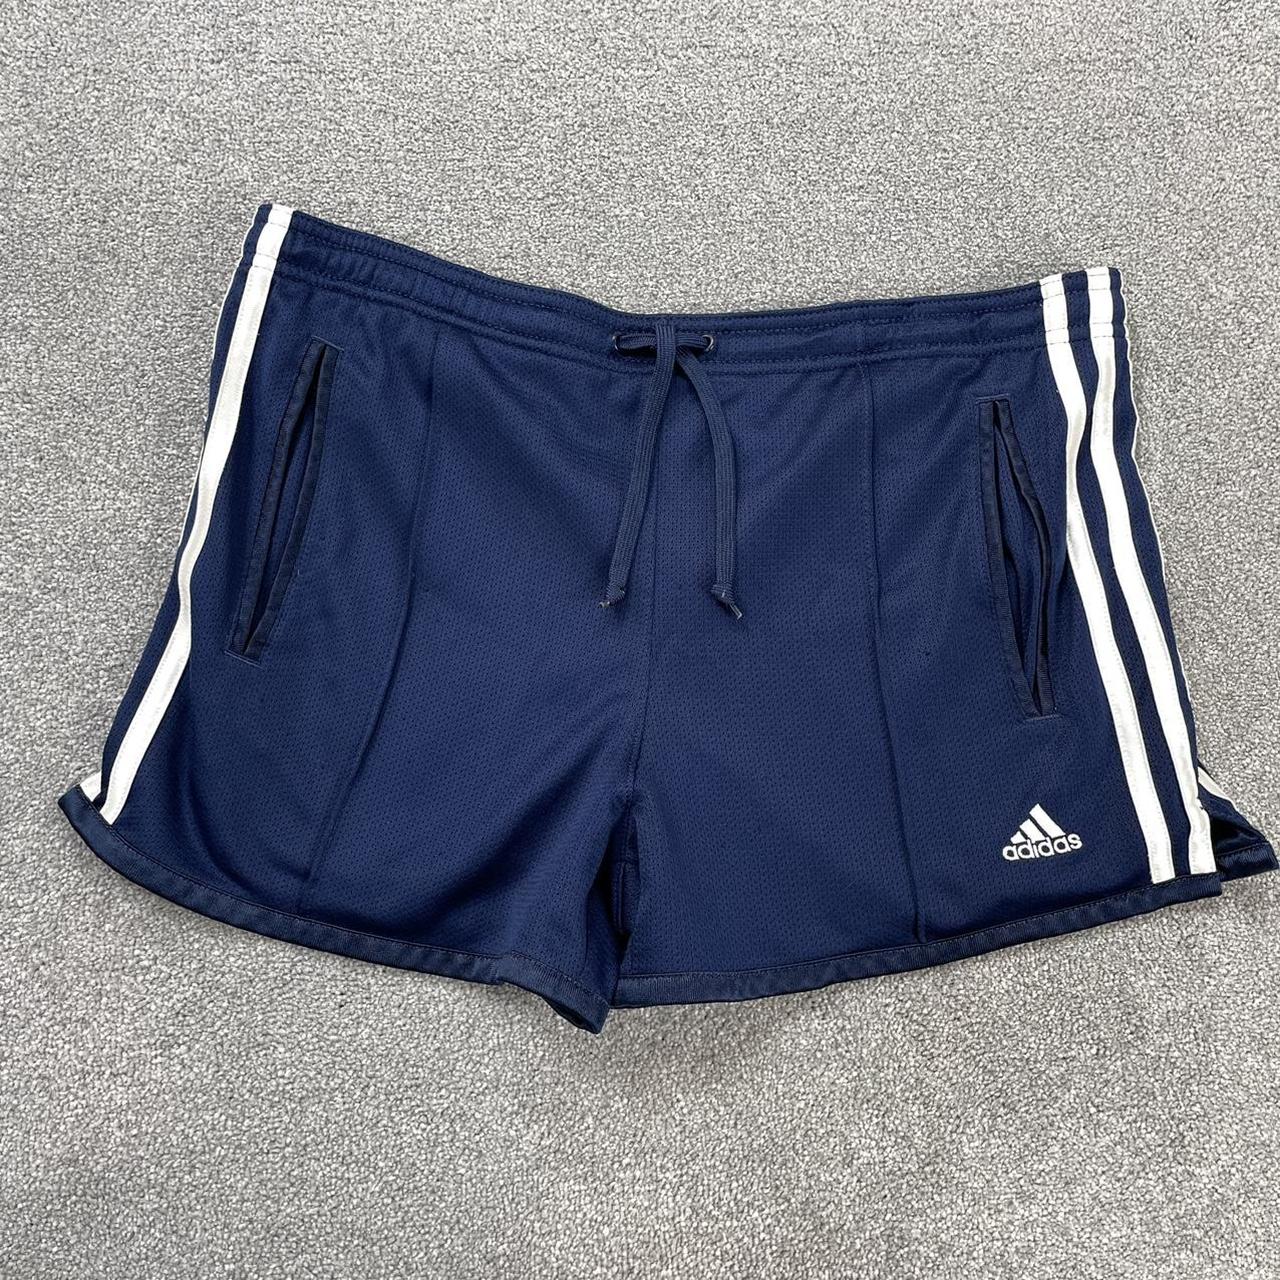 BLUE WHITE ADIDAS SHORTS Sport Shorts with striped... - Depop